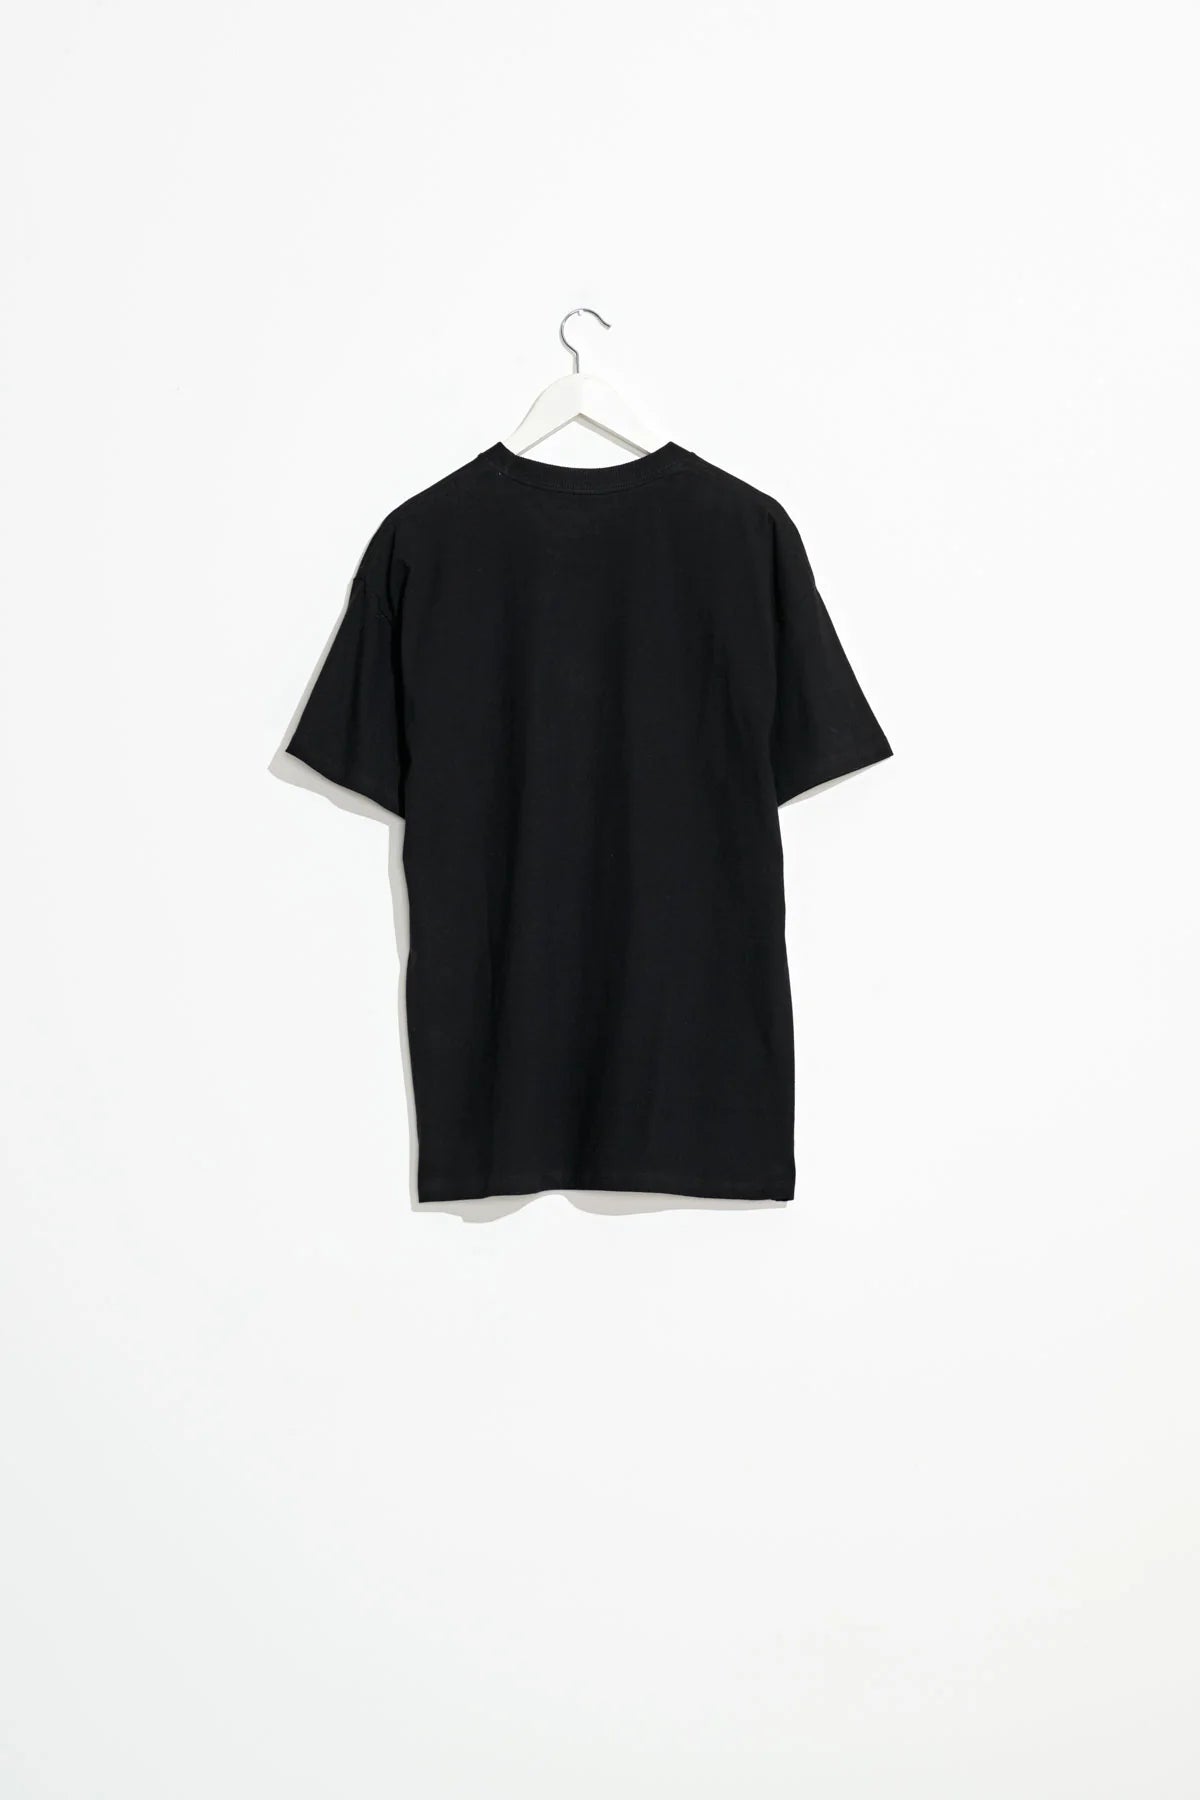 MISFIT // Supercorporate 2.0 SS Tee WASHED BLACK